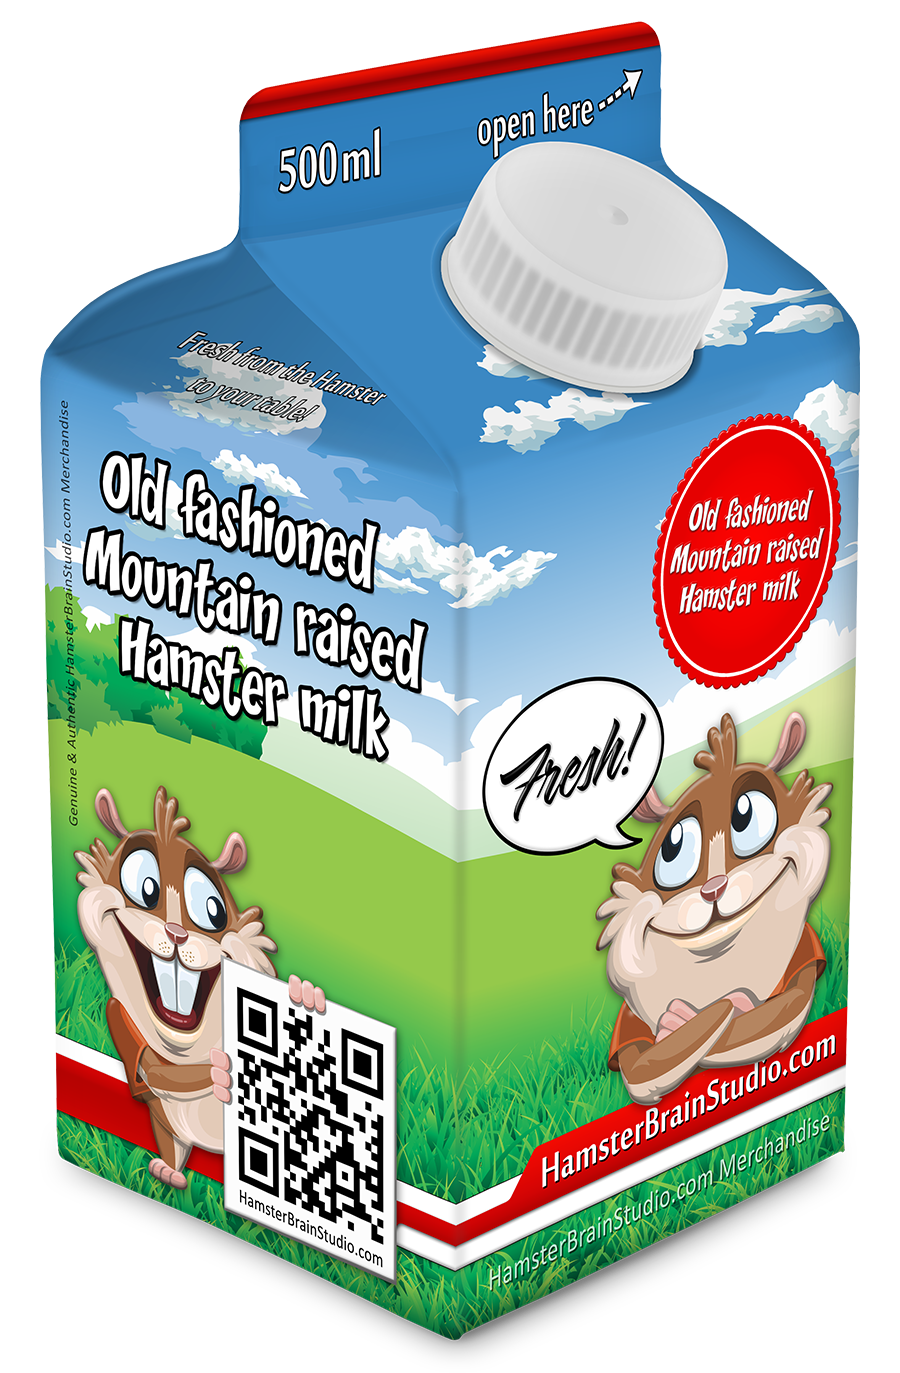 Hamster milk now available from HamsterBrainStudio.com